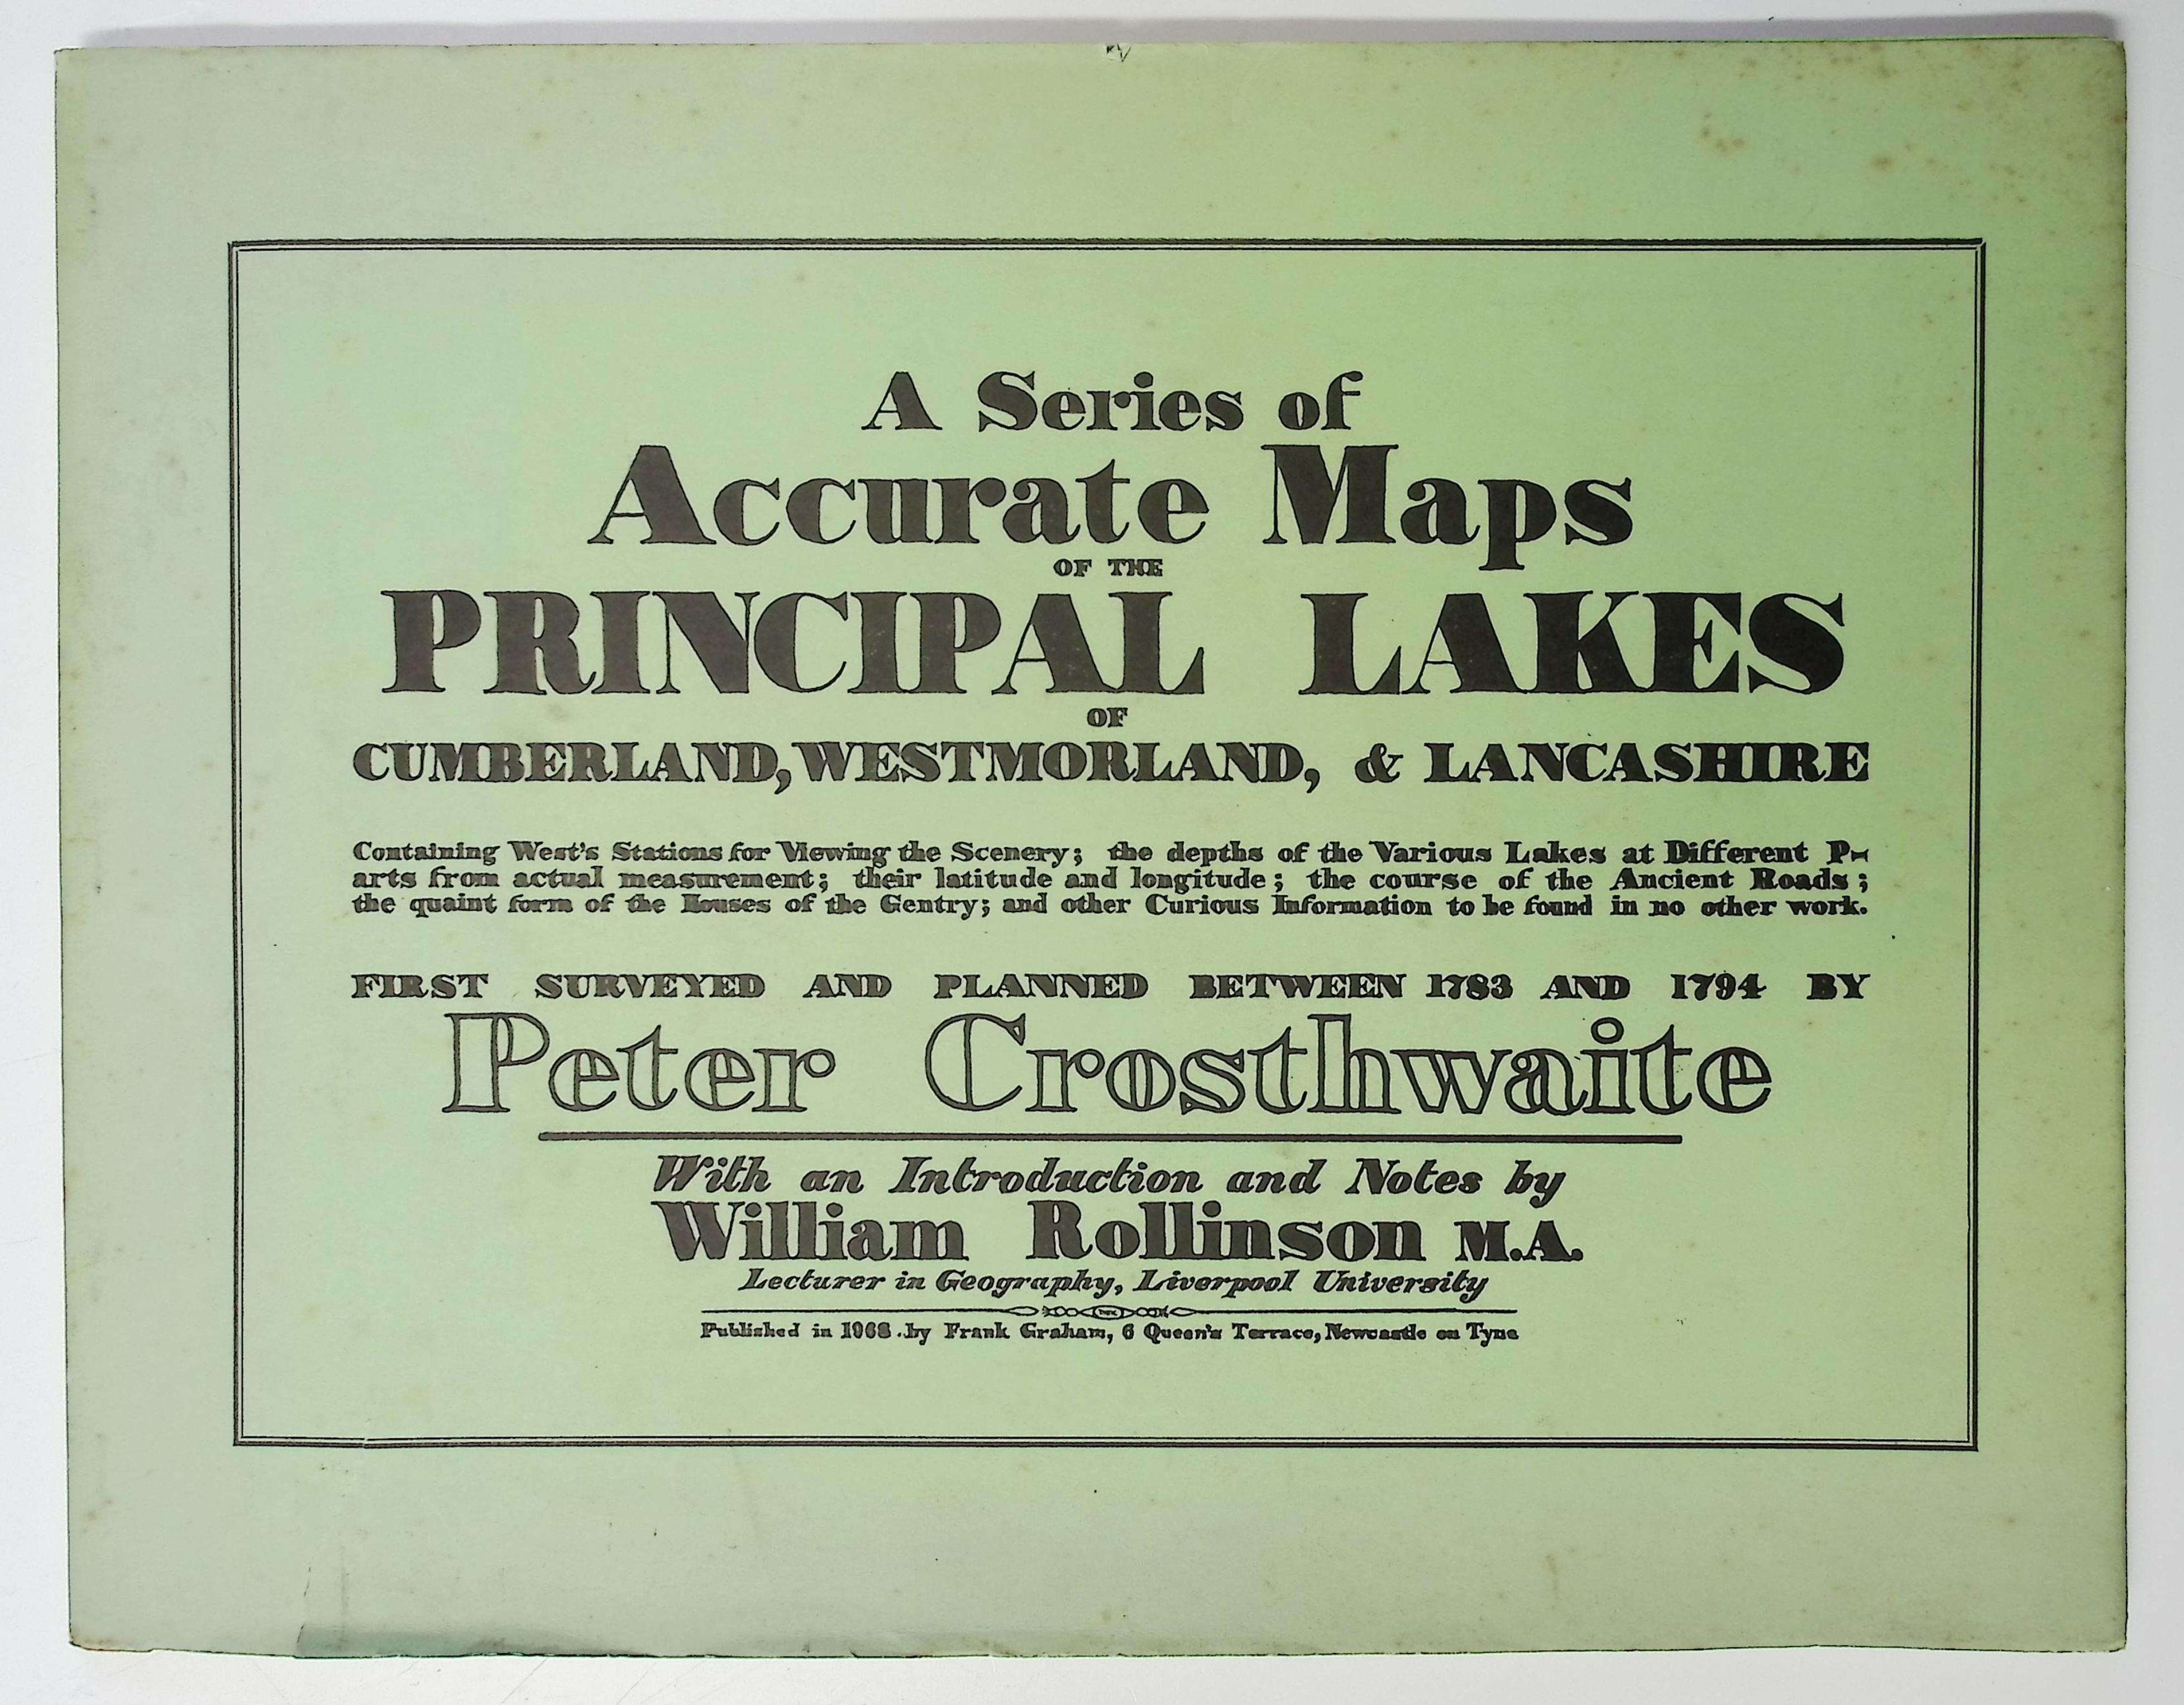 A Series of Accurate Maps of the Principal Lakes of Cumberland, Westmorland, and Lancashire First Surveyed and Planned between 1783 and 1794 by Peter Crosthwaite. With an Introduction and Notes by William Rollinson.